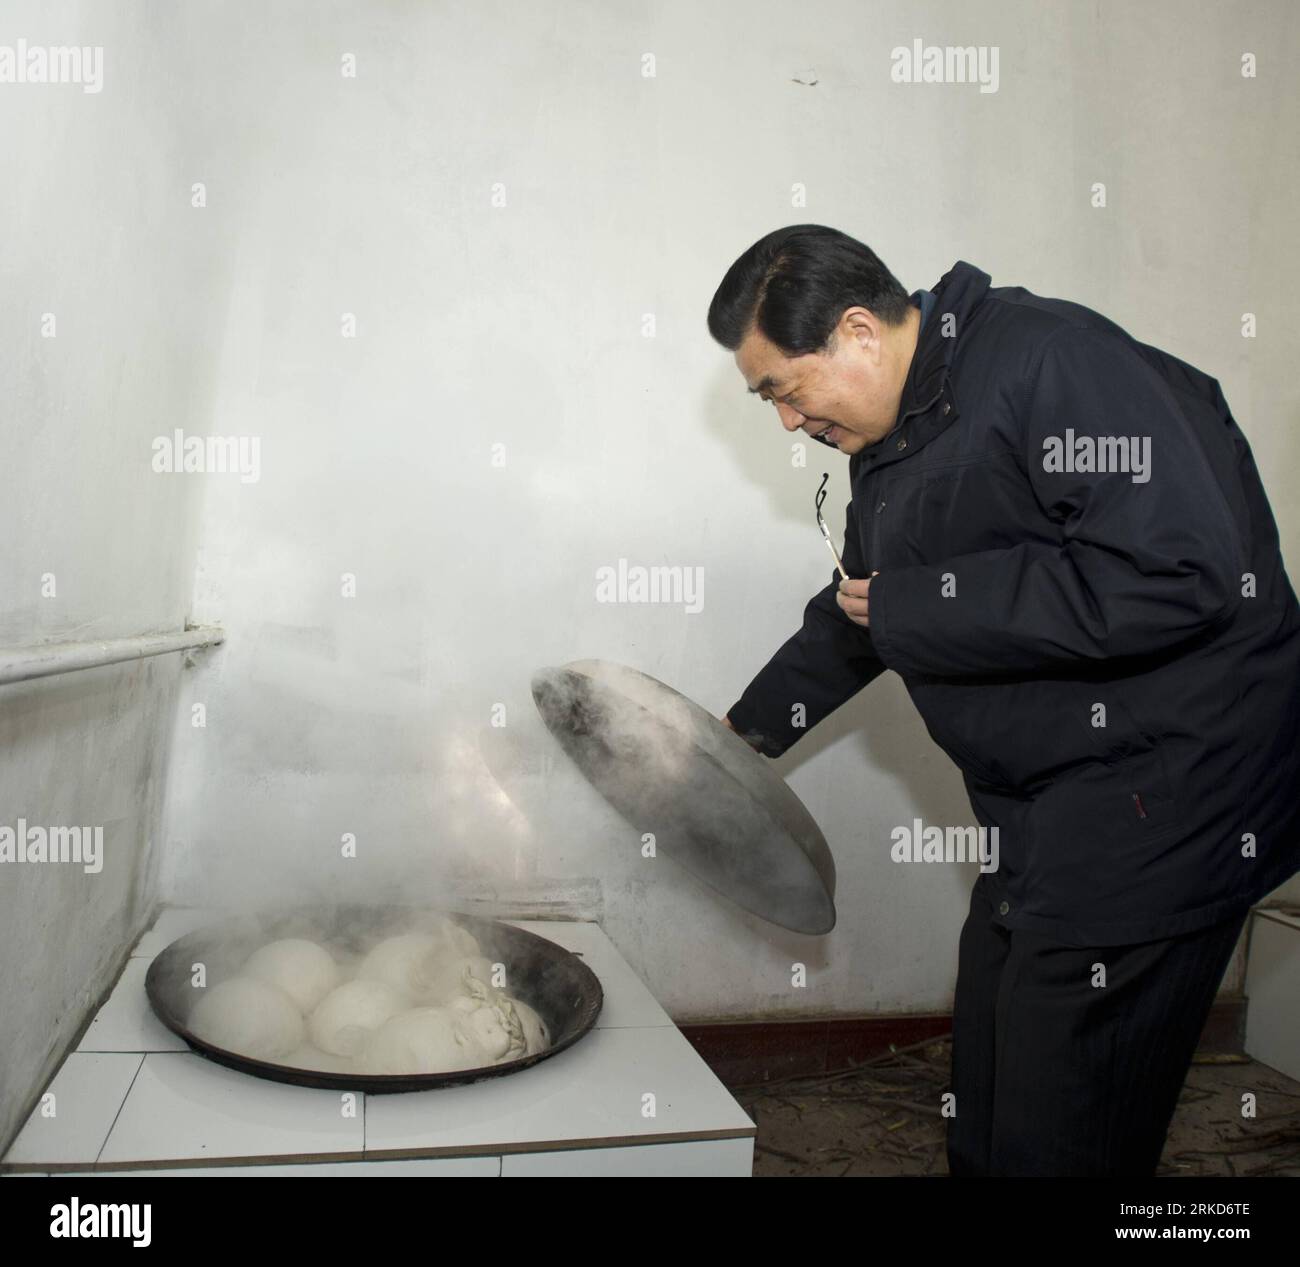 Bildnummer: 54874504  Datum: 02.02.2011  Copyright: imago/Xinhua (110202) -- BAODING, Feb. 2, 2011 (Xinhua) -- Chinese President Hu Jintao feels pleasant while looking at the steam bread prepared for festival meals in the home of Yan Deshu, an aged member of Communist Party of China, in Shijiatong Village, Xishanbei Township of Baoding City, north China s Hebei Province, Feb. 2, 2011. Hu made a tour in Baoding from Feb. 1 to 2 to welcome the Spring Festival, or China s Lunar New Year, with local officials and residents. (Xinhua/Li Xueren) (hdt) CHINA-HEBEI-HU JINTAO-VISIT (CN) PUBLICATIONxNOTx Stock Photo